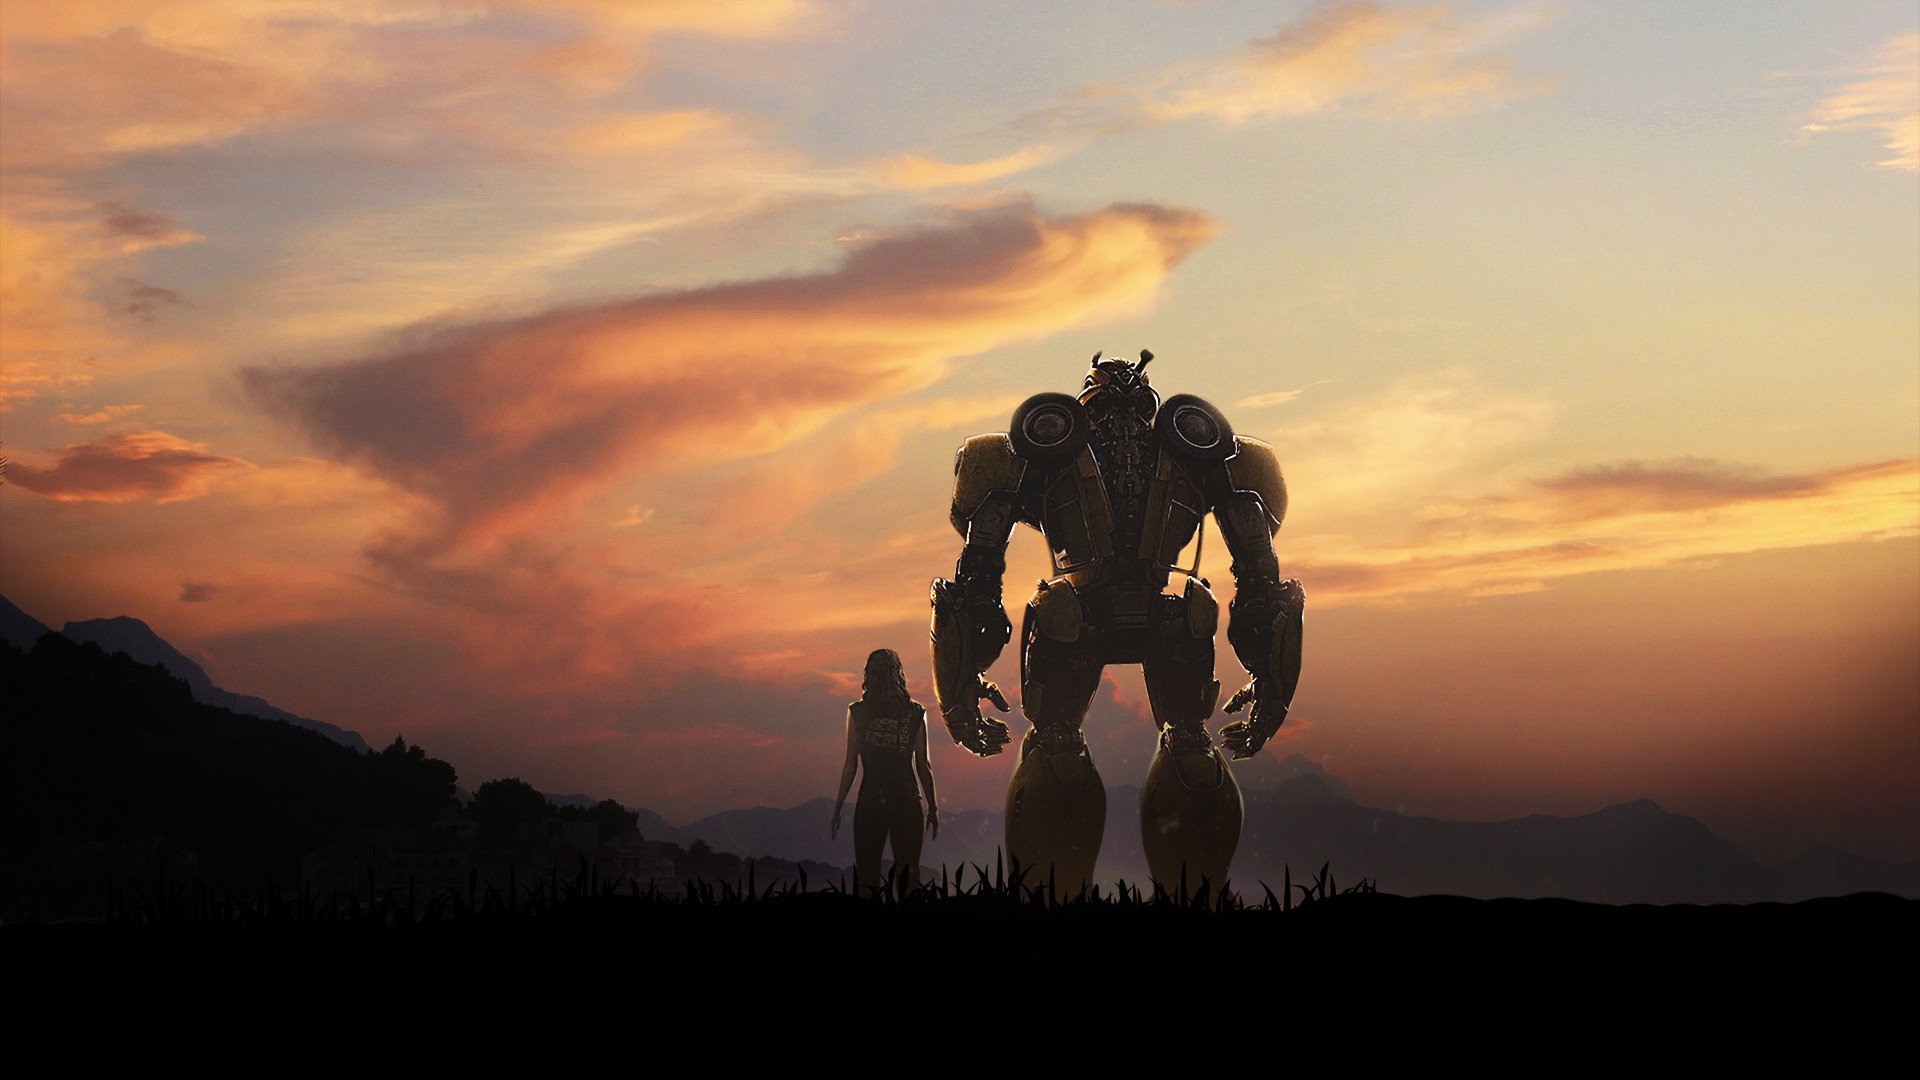 Bumblebee Transformers Transformers Movies Transformer Bumblebee Bumblebee Movie 1920x1080